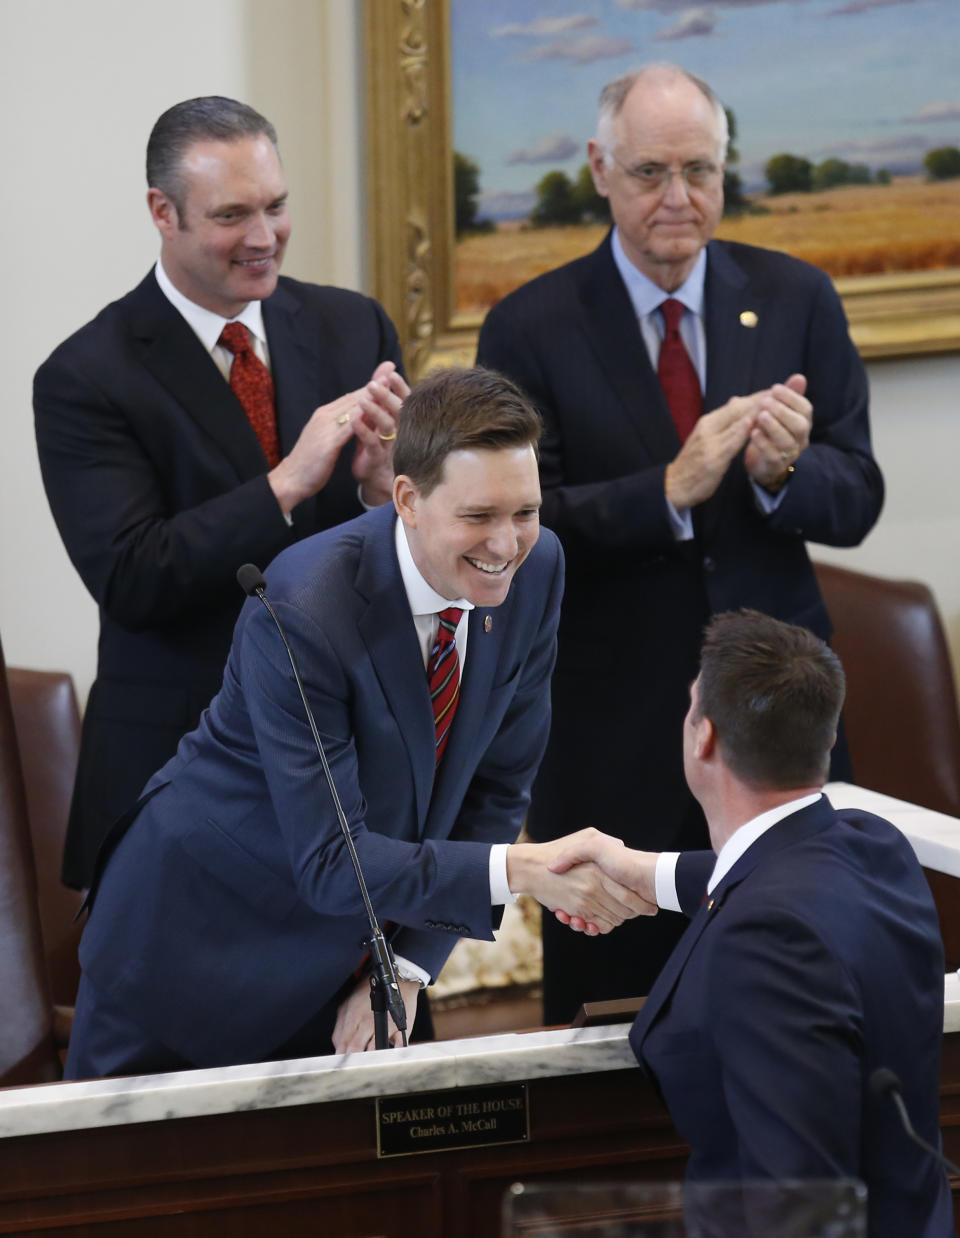 Oklahoma Lt. Gov. Matt Pinnell, left, greets Gov. Kevin Stitt, right, who arrives for the State of the State in Oklahoma City, Monday, Feb. 4, 2019. (AP Photo/Sue Ogrocki)